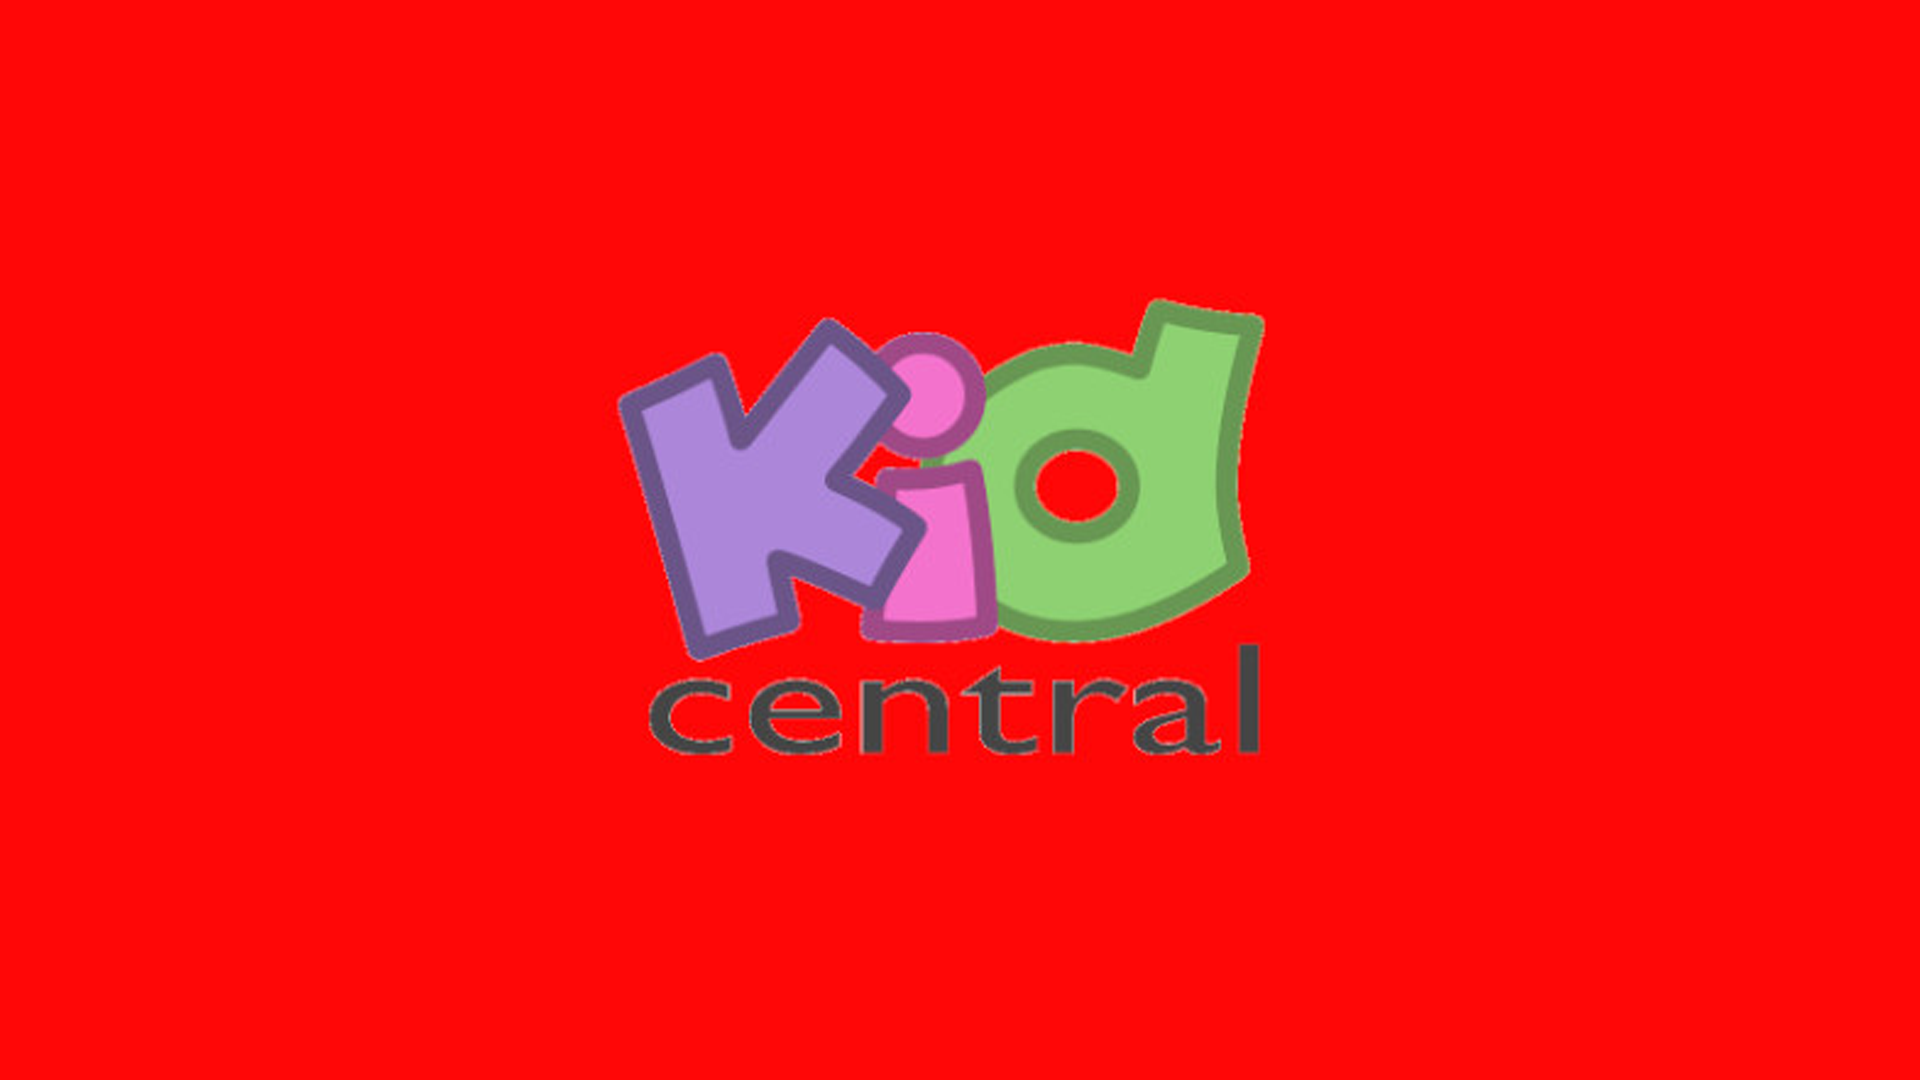 Kid Central